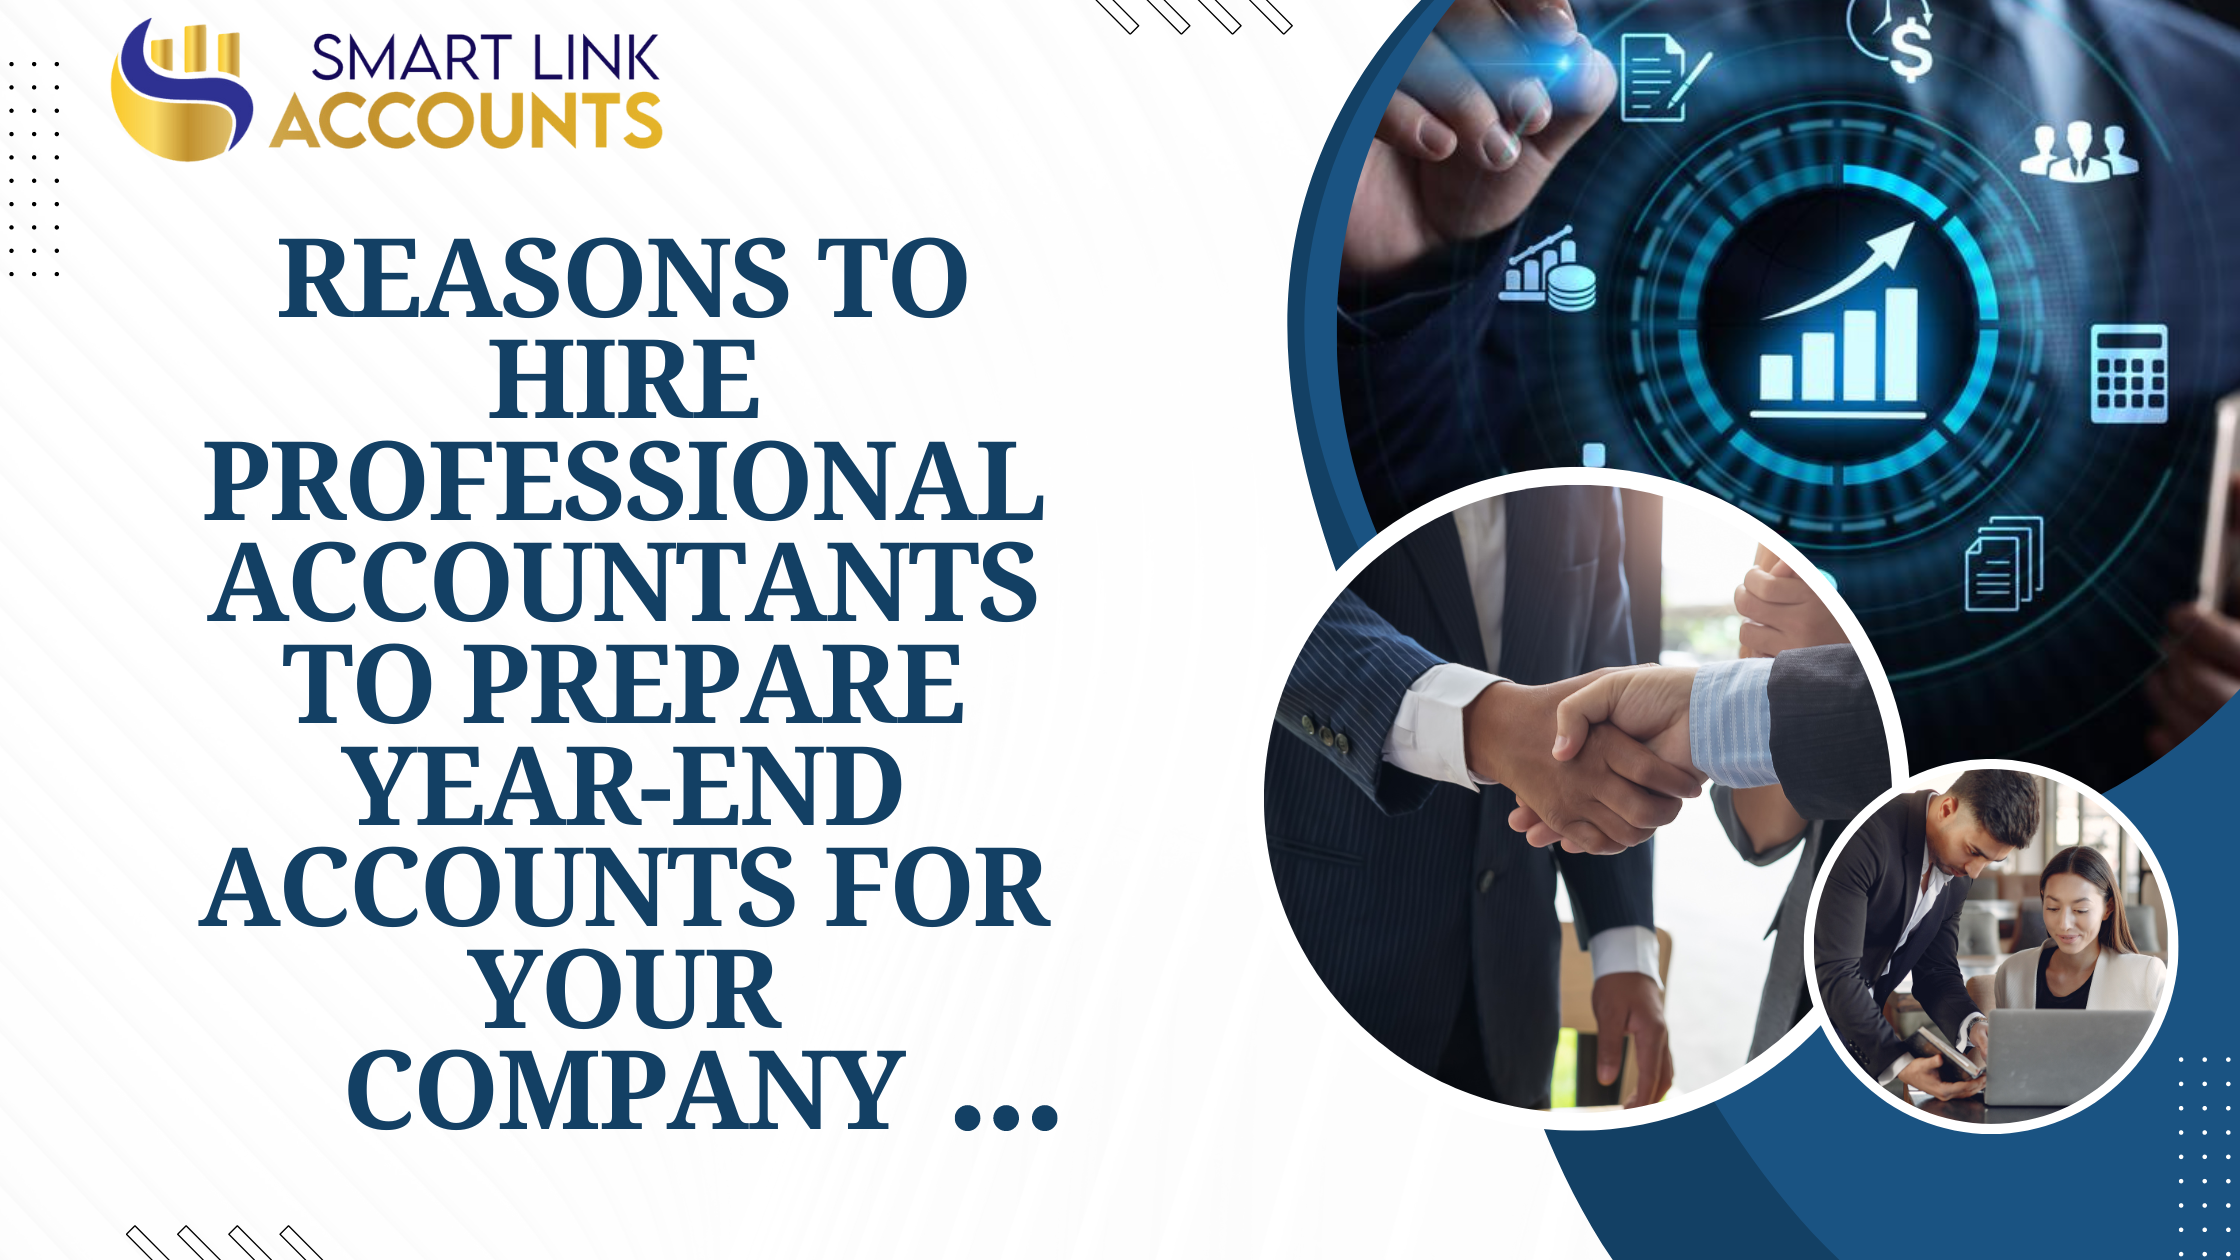 Reasons to Hire Professional Accountants to Prepare Year End Accounts for Your Company